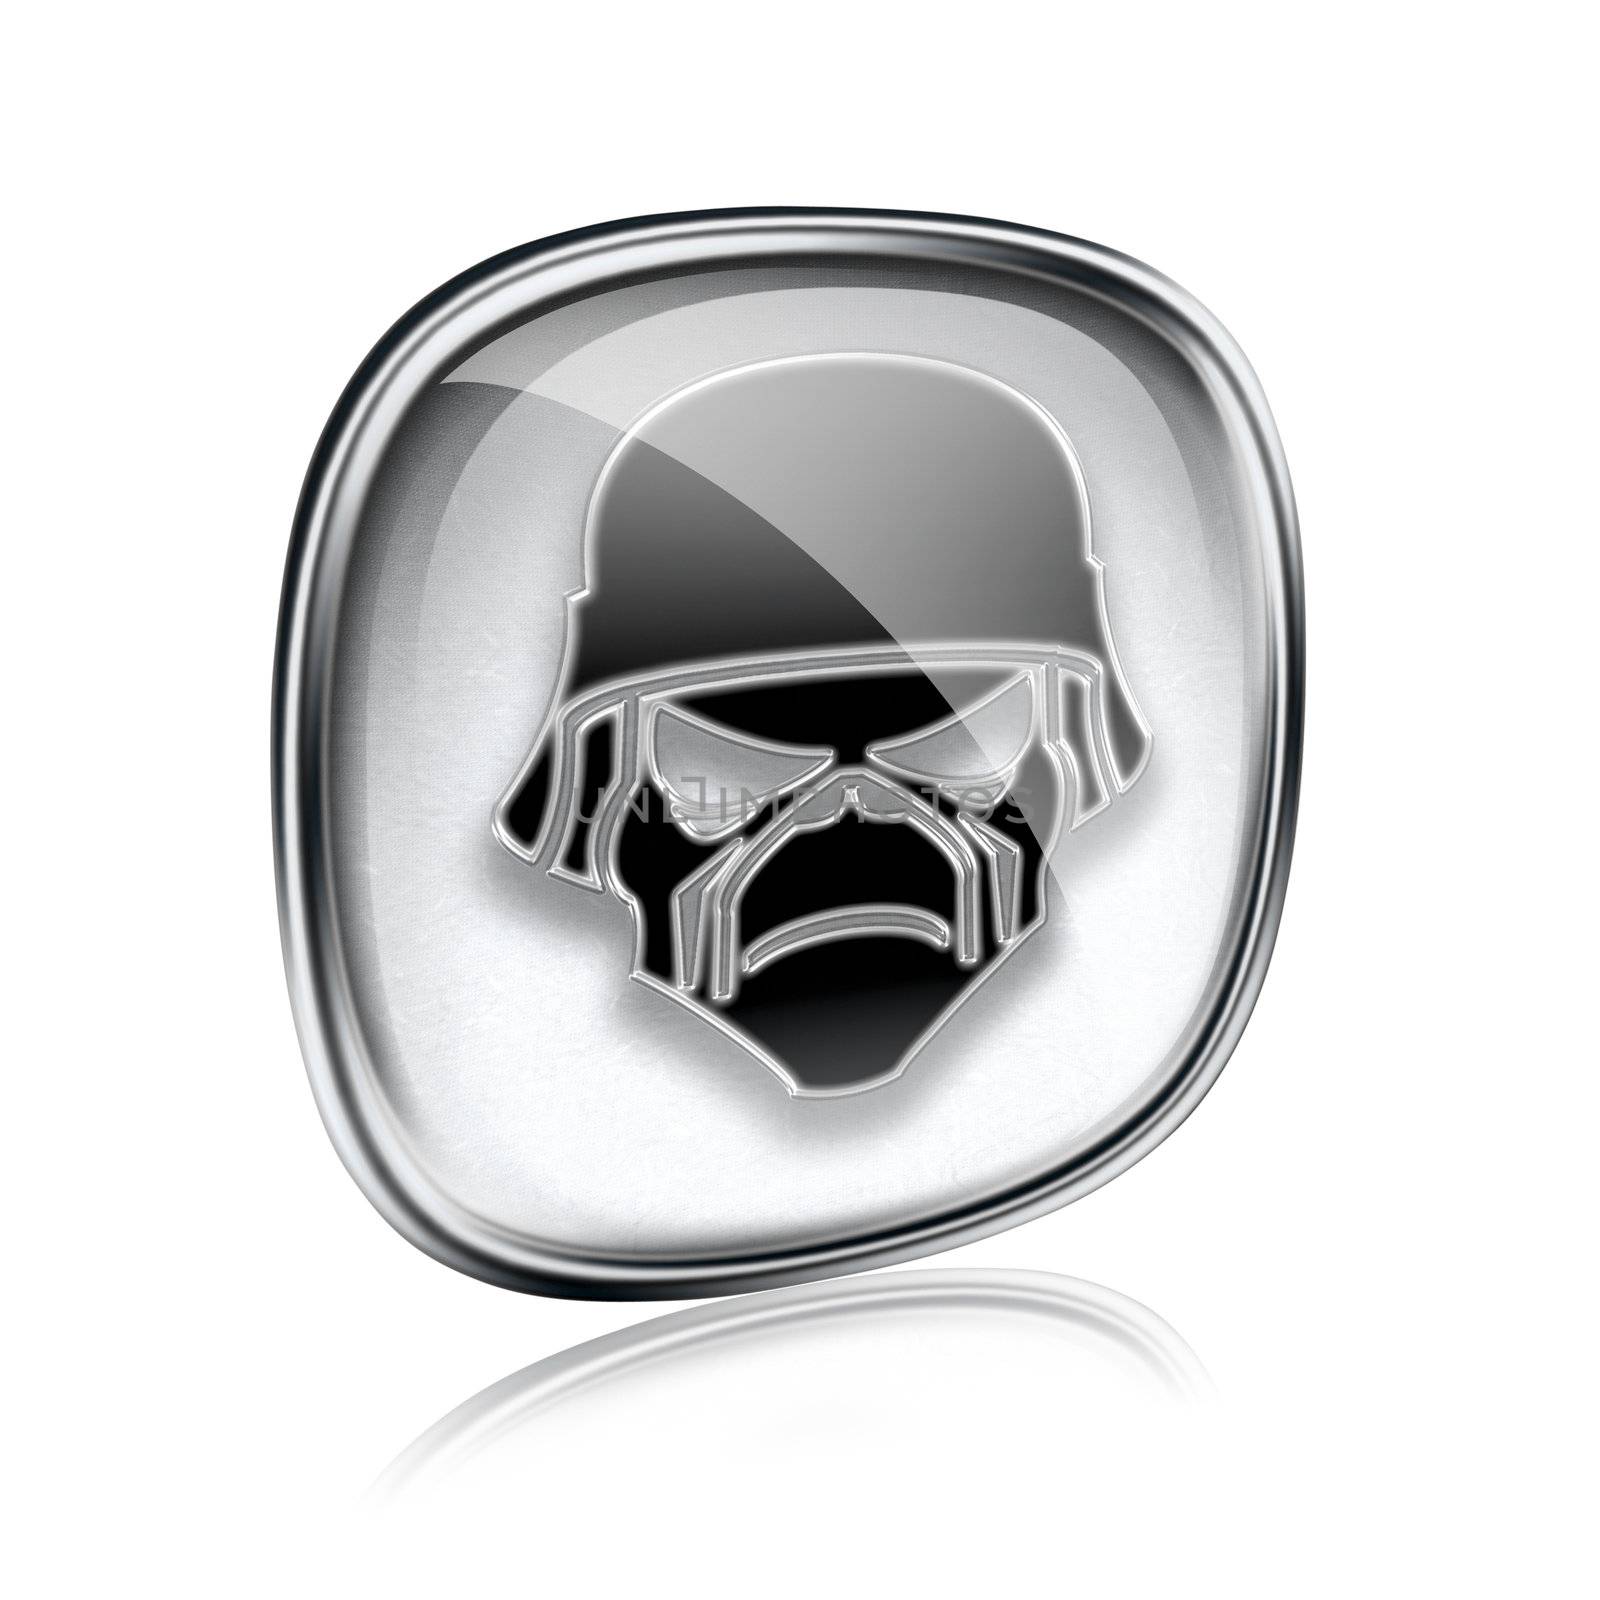 Army icon grey glass, isolated on white background